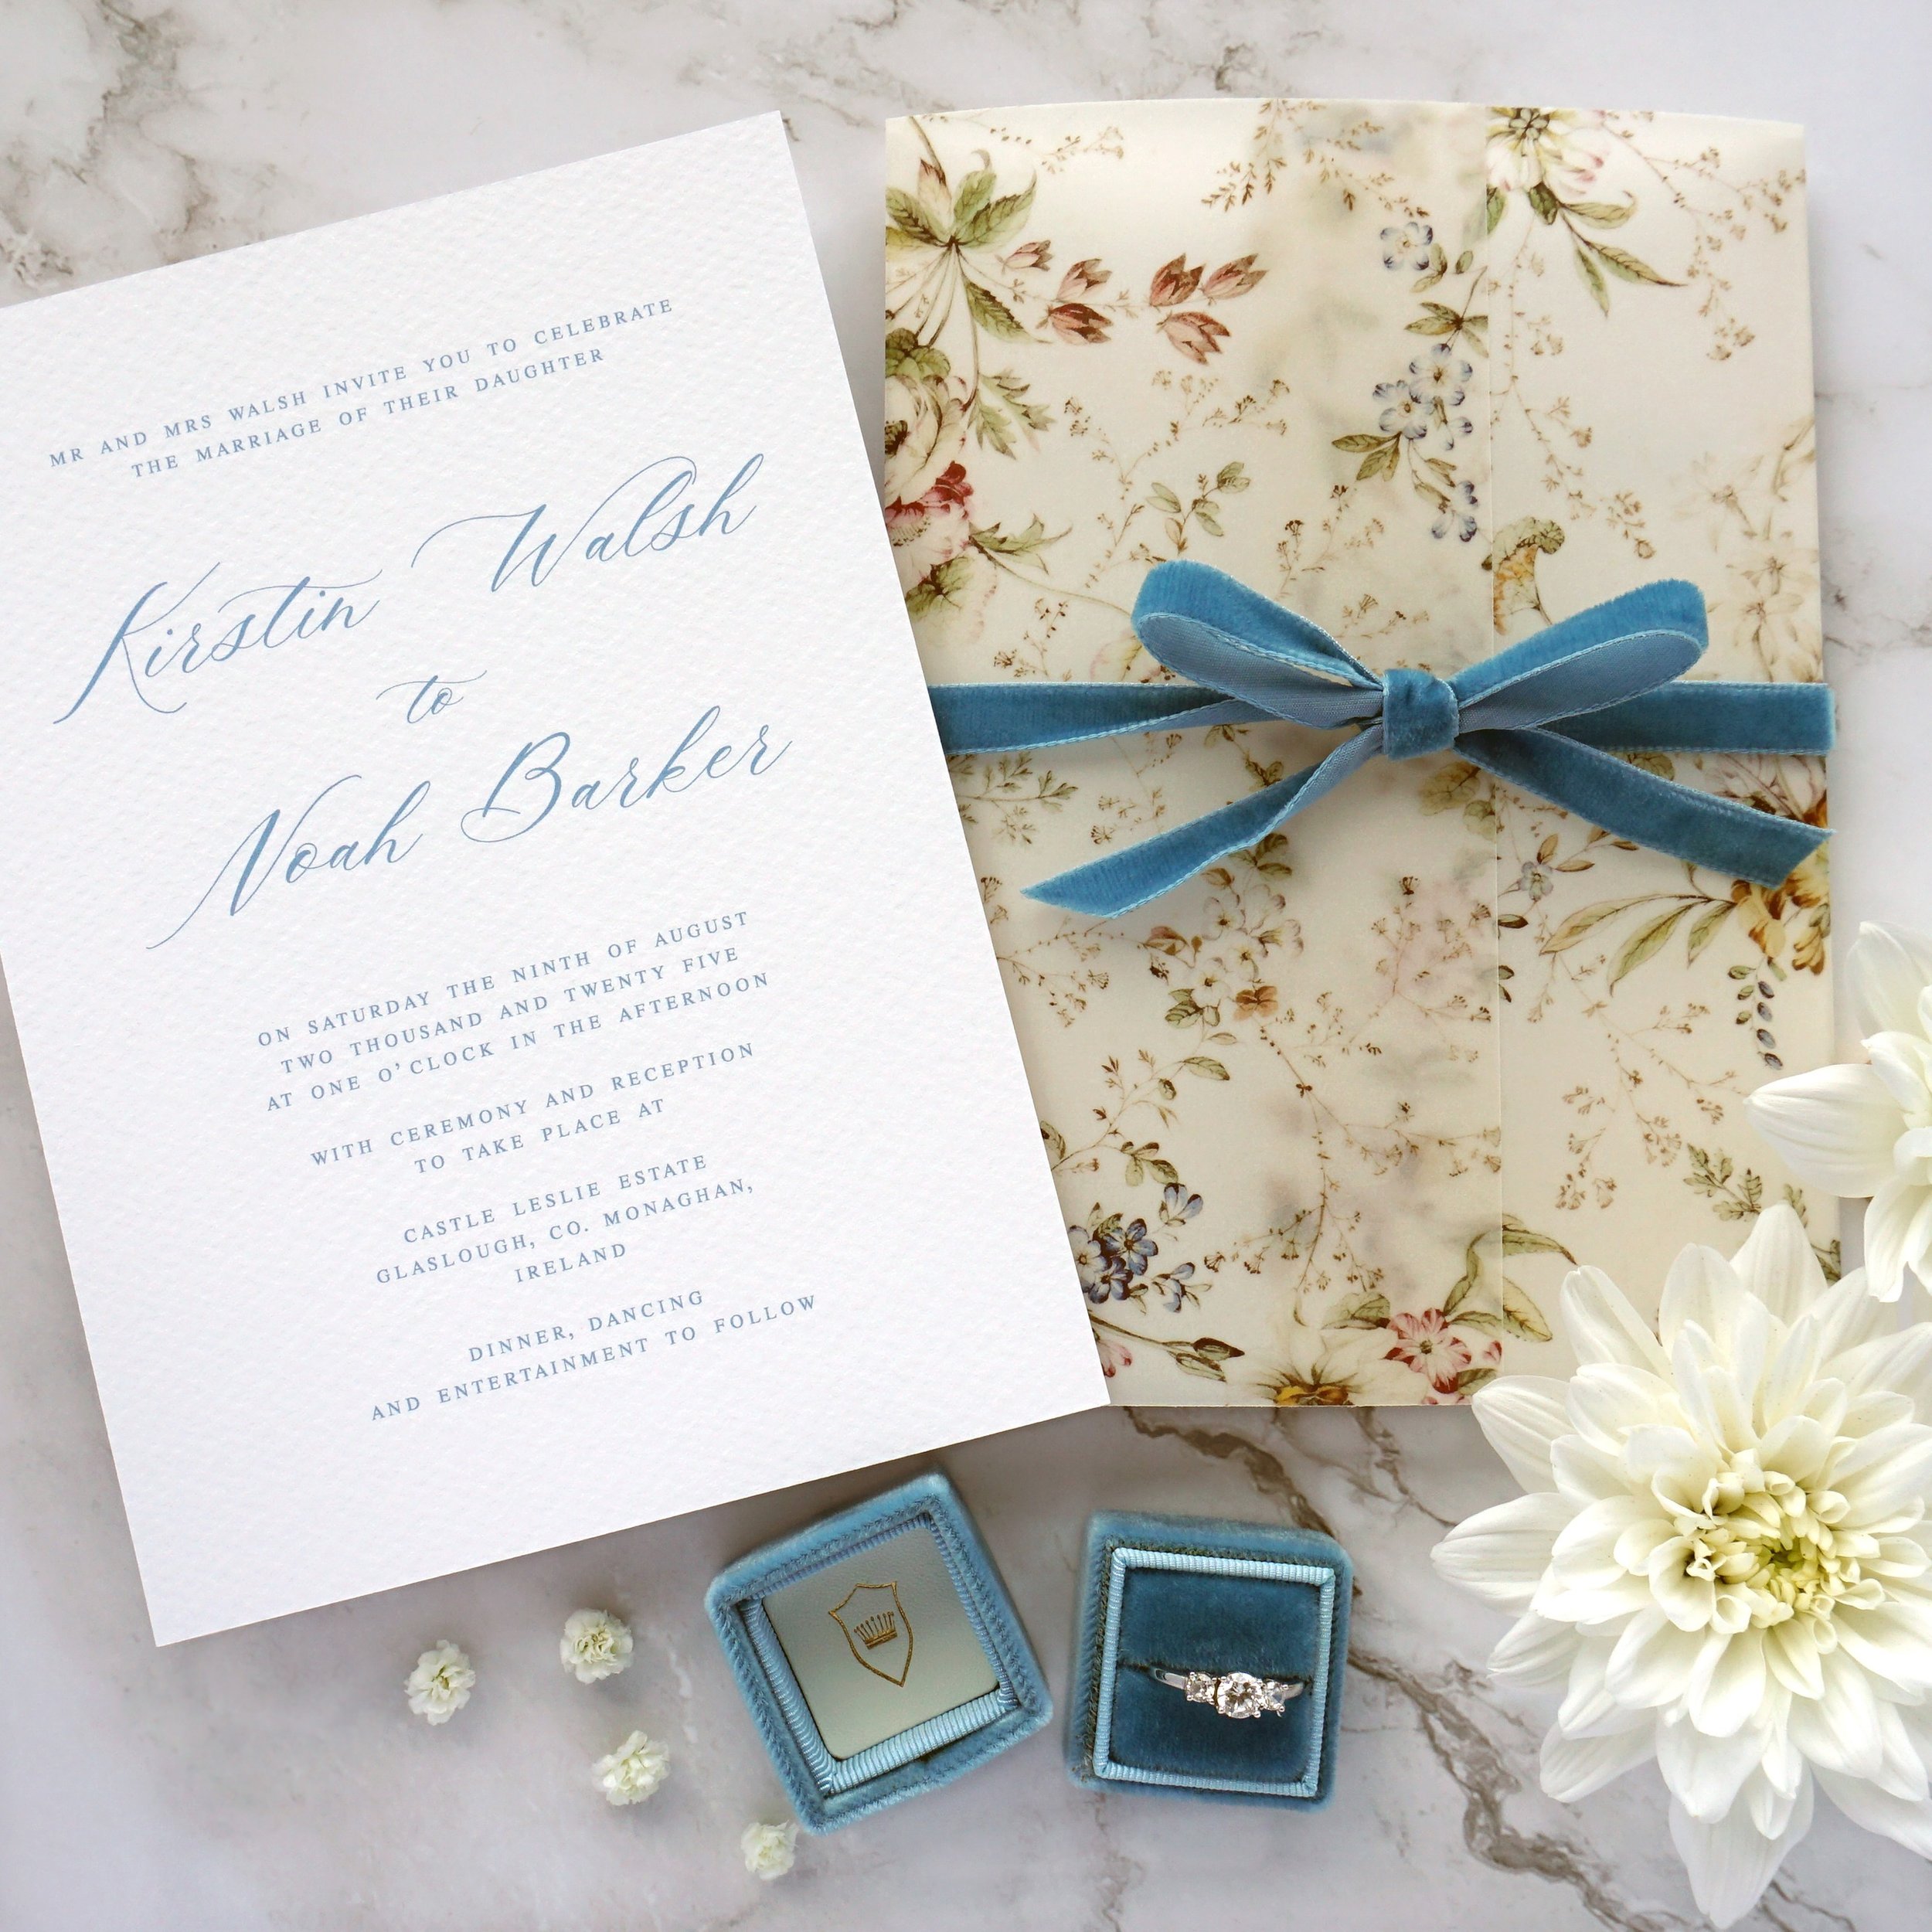 KIRSTIN - Delicate floral garden vibes are here with the Kirstin suite. Printed on luxurious Italian cardstock and wrapped in a printed vellum jacket, this suite has it all, it&rsquo;s even tied up in a velvet bow!
.
.
.
#weddingstationerysample #sam